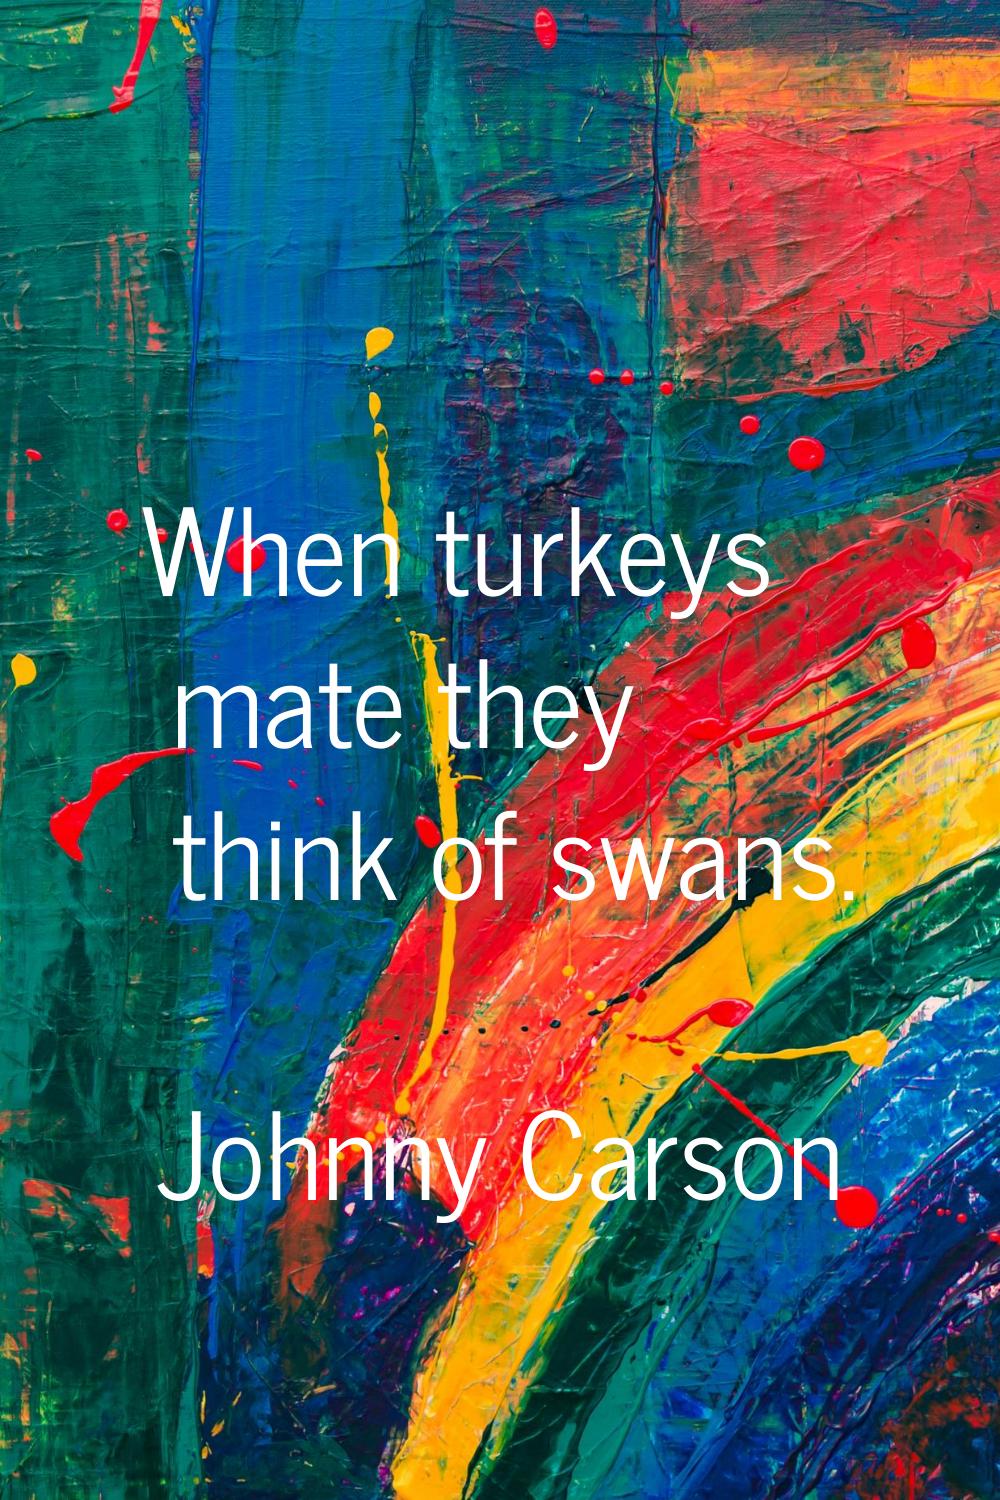 When turkeys mate they think of swans.